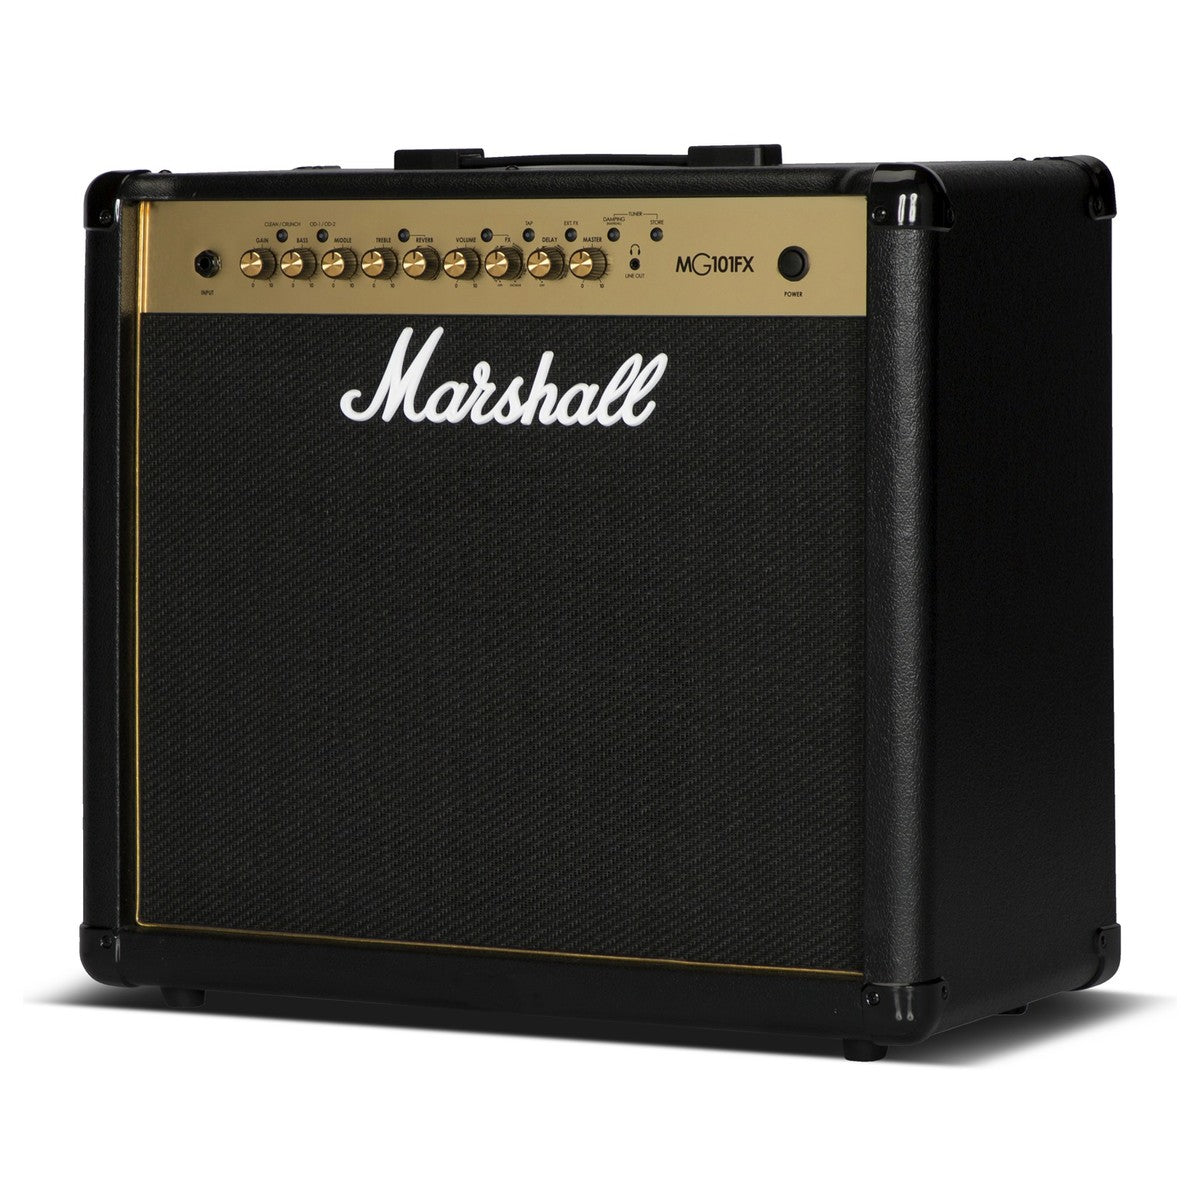 Marshall MG101GFX 100W 1x12'' Guitar Combo Amplifier with Effects (Right) - Reco Music Malaysia